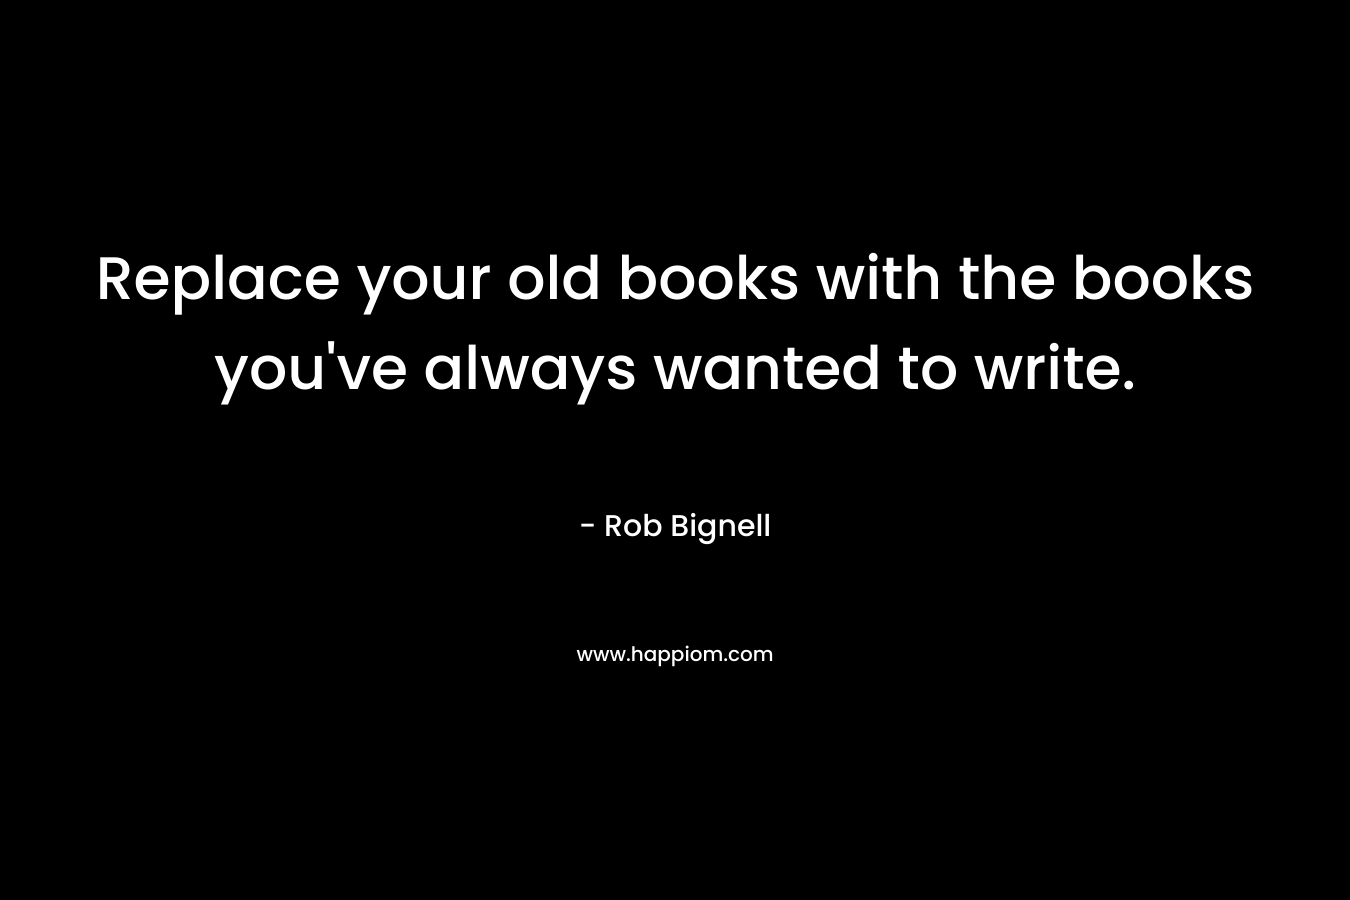 Replace your old books with the books you've always wanted to write.